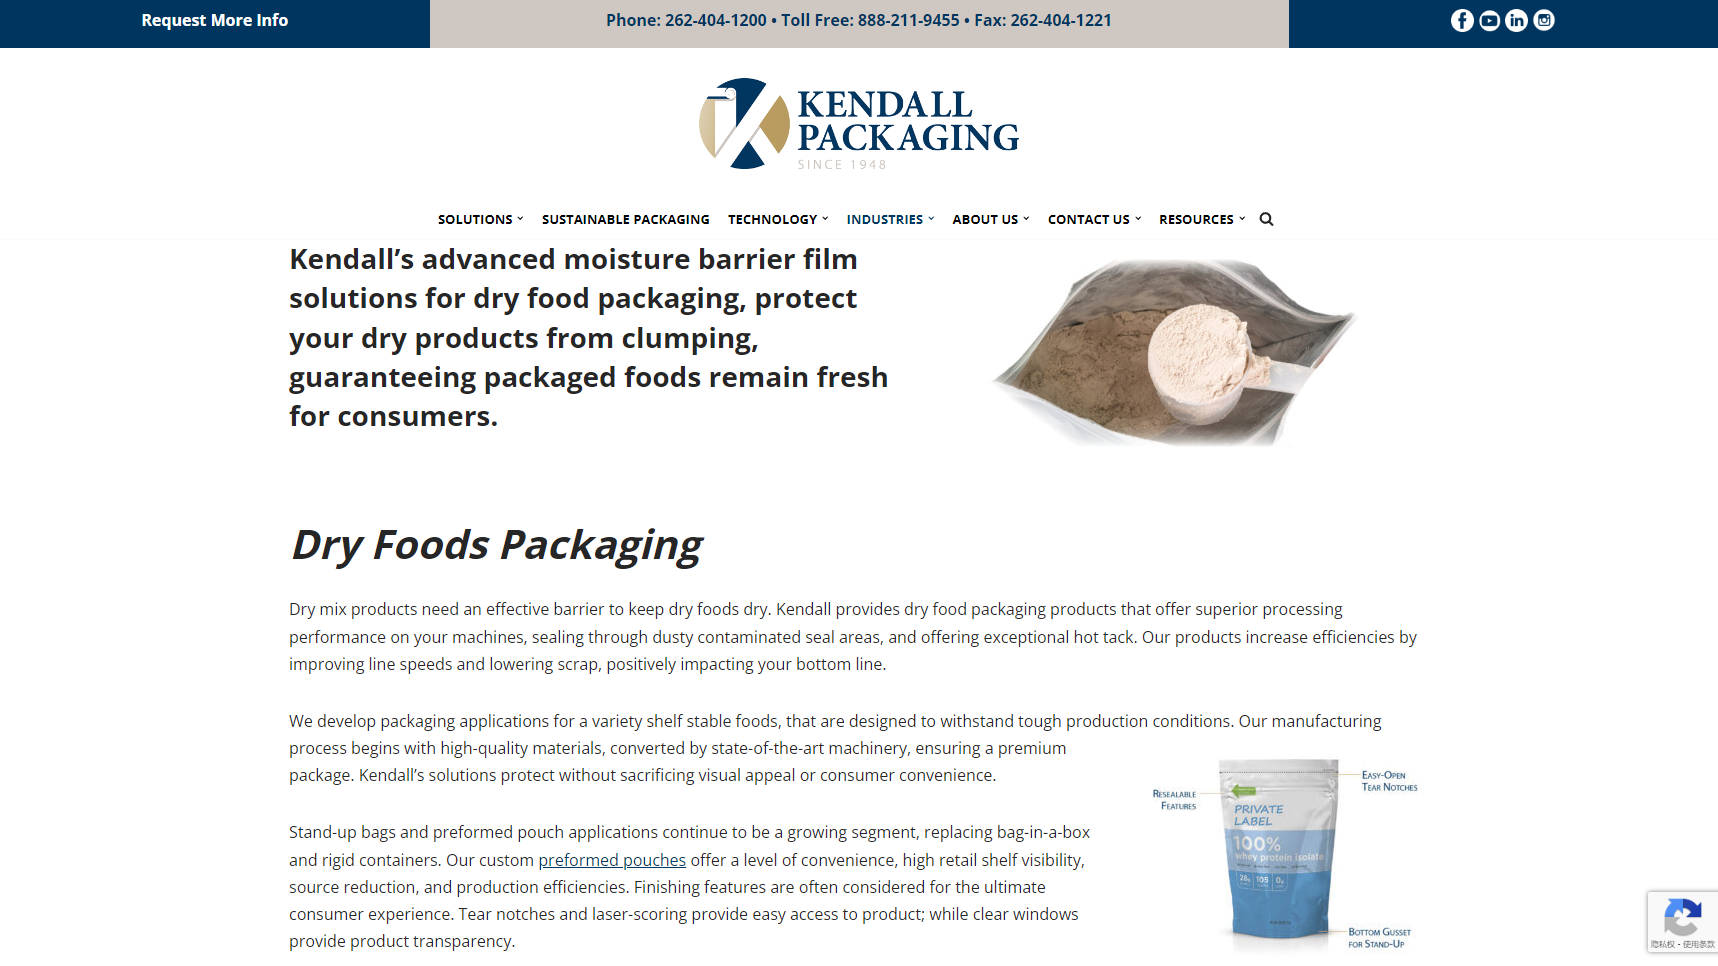 Kendall Packaging Corporation - Food Packaging Manufacturer